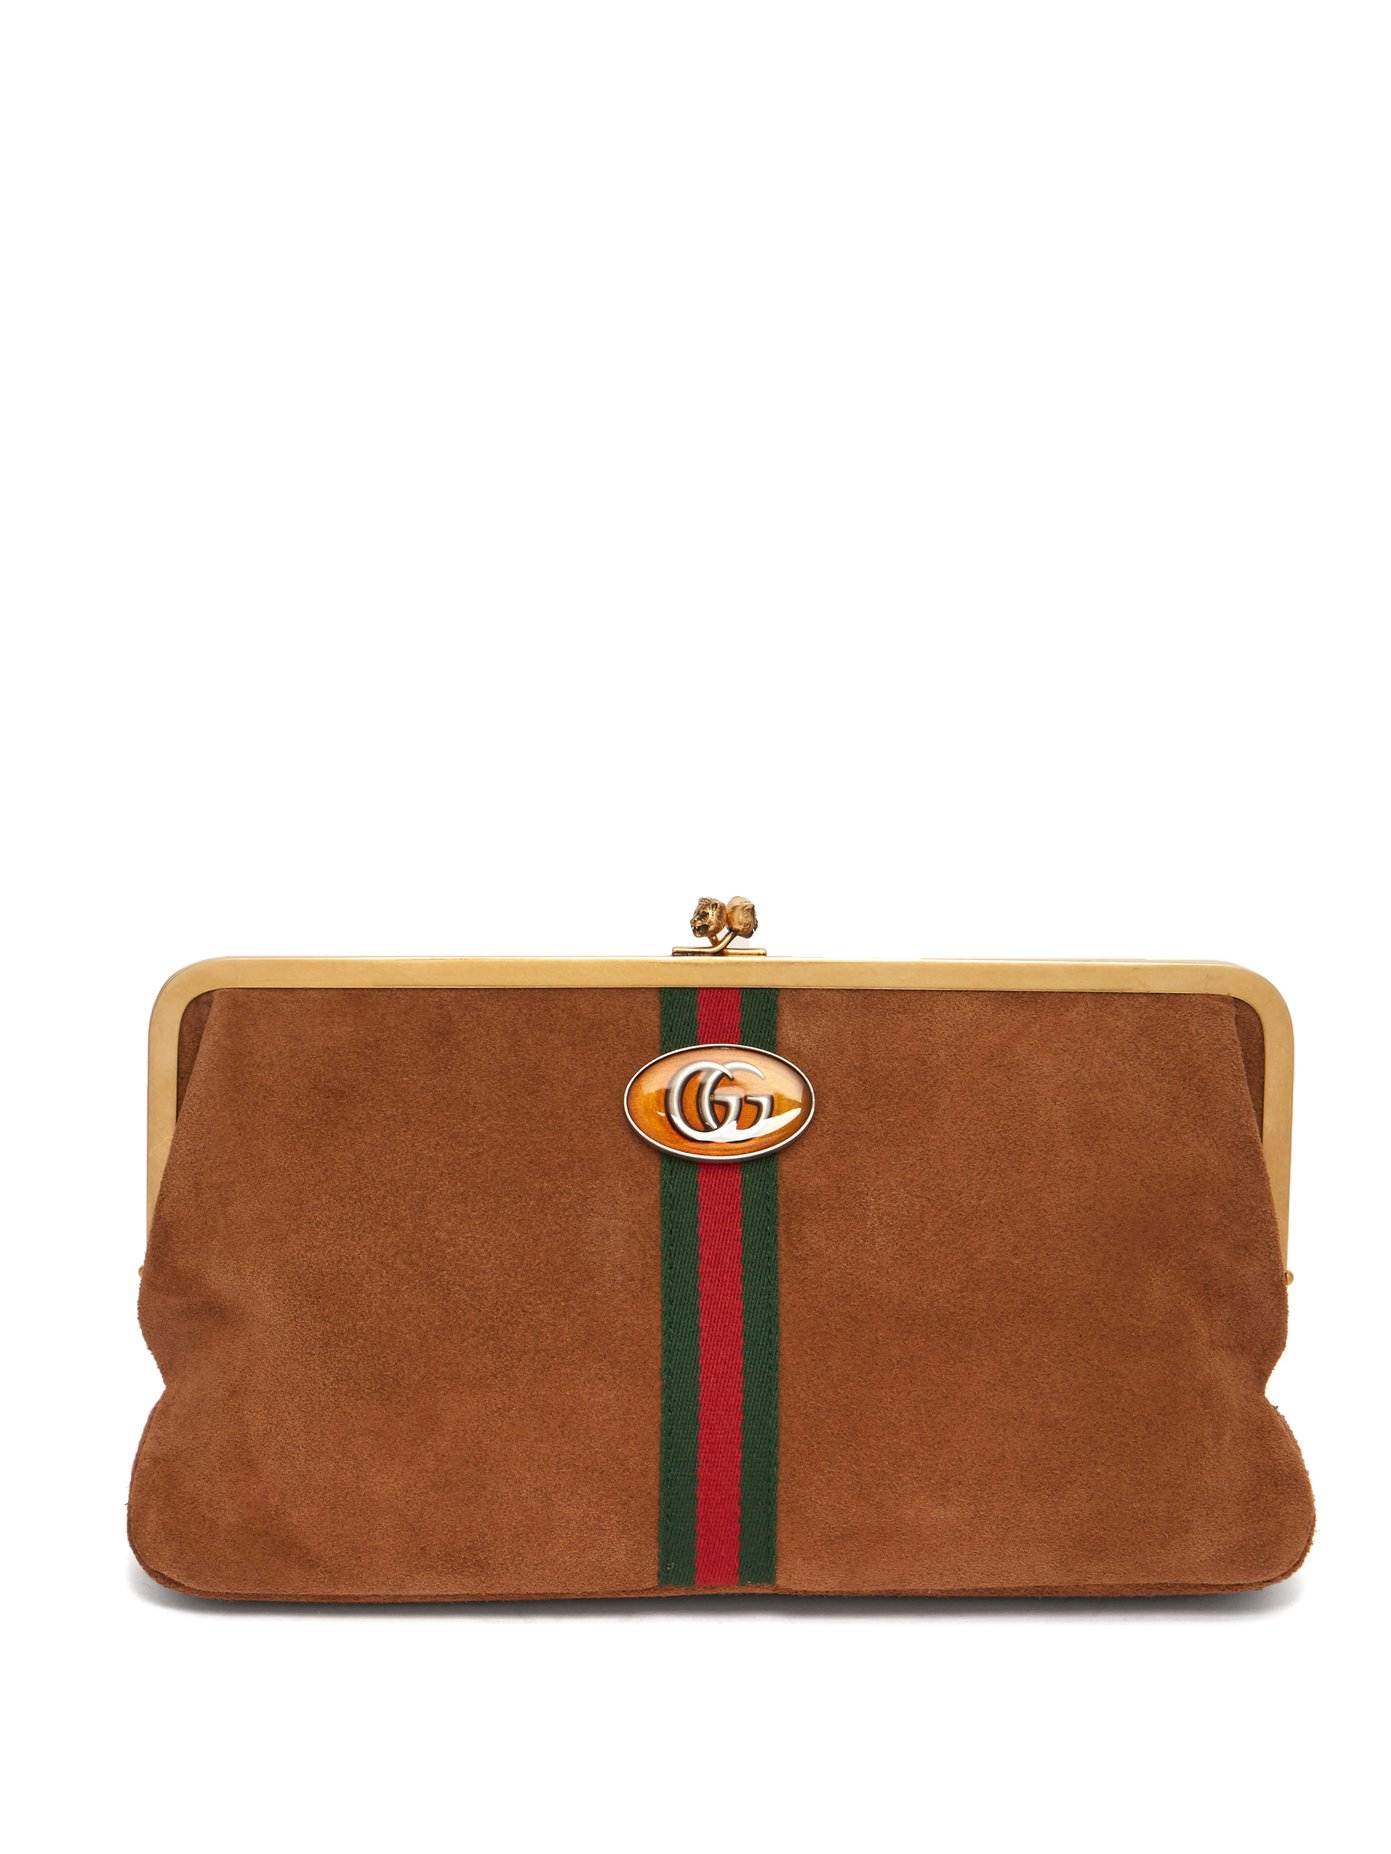 Gucci（グッチ）Ophidia GG suede clutch bag 